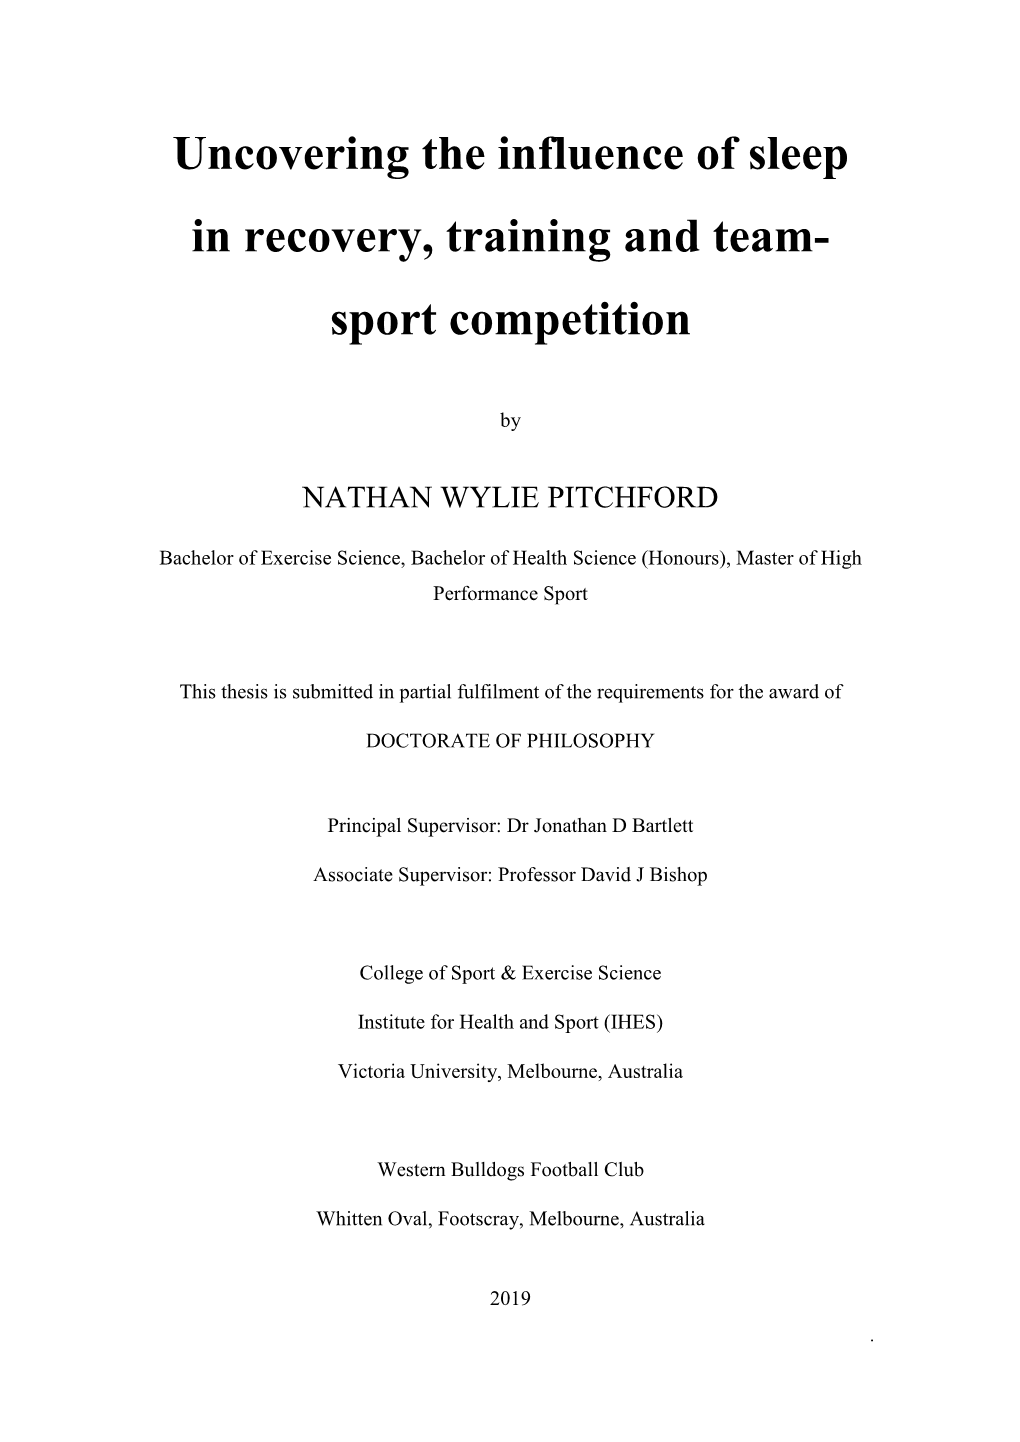 Uncovering the Influence of Sleep in Recovery, Training and Team- Sport Competition